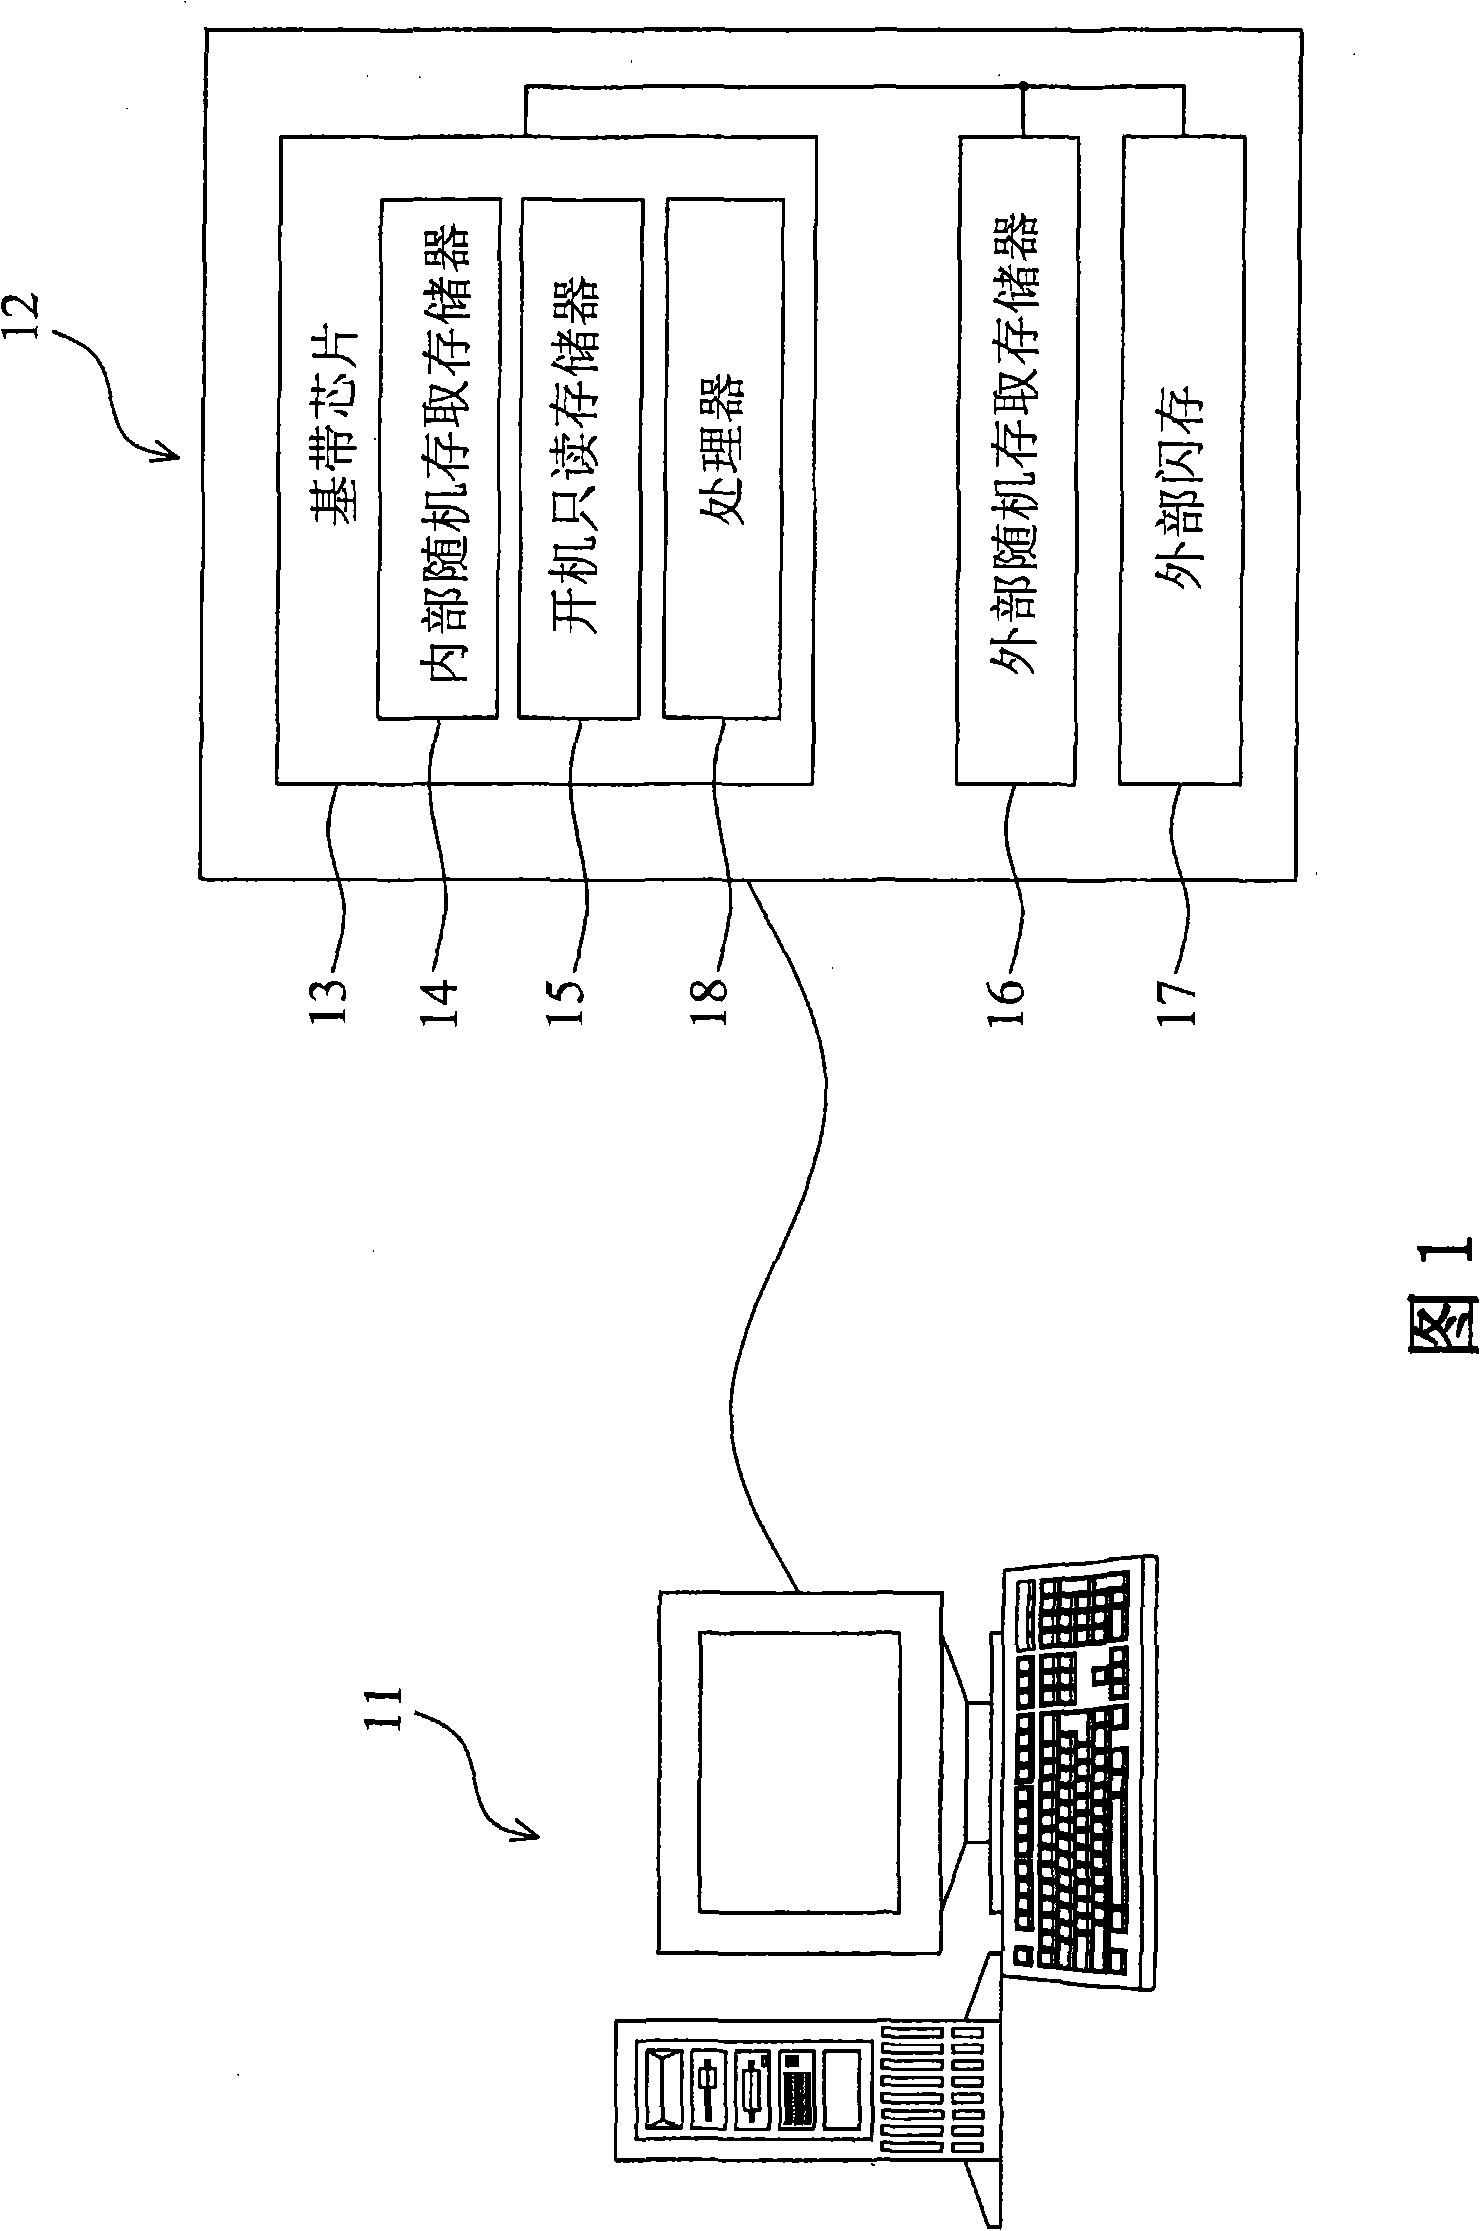 Authentification device and method